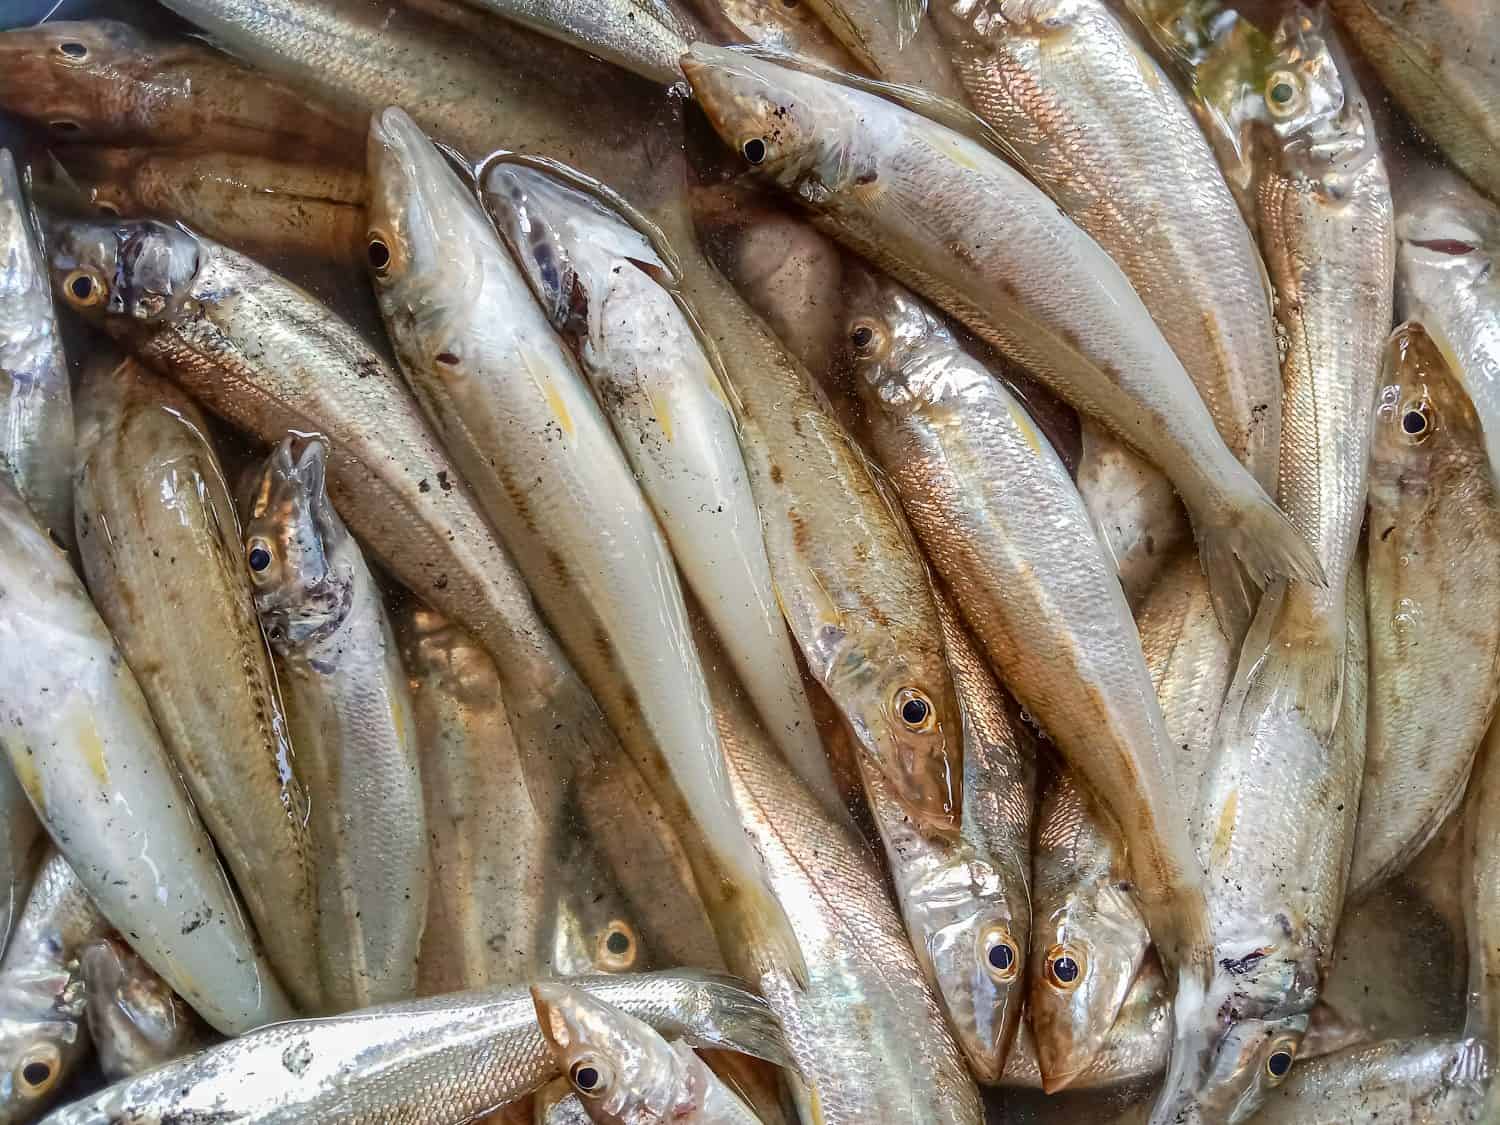 Silver sillago or Bebulus (Sillago sihama), also known as the silver whiting and sand smelt, is a marine fish, the most widespread and abundant member of the smelt-whiting family Sillaginidae.